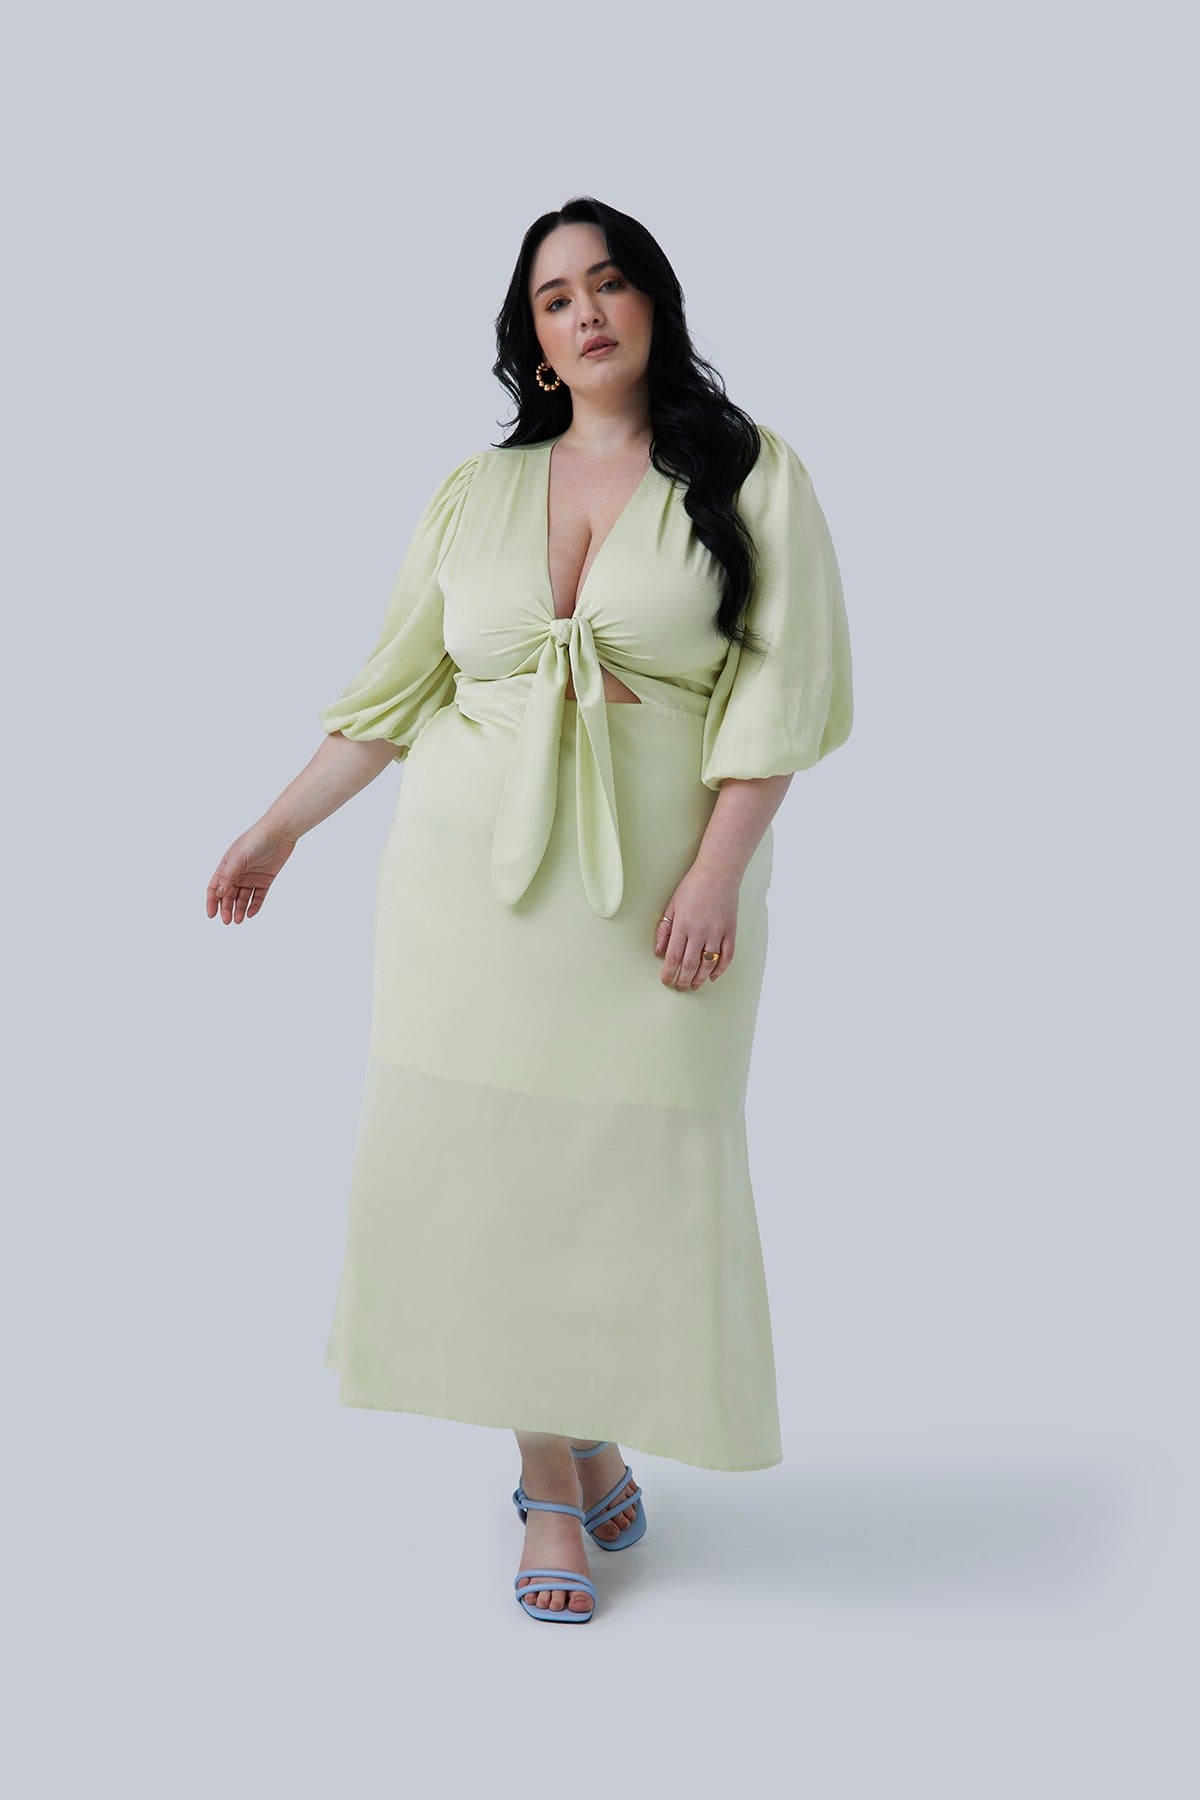 Tie Front Midi Dress with Waist Cutout and Bubble Sleeve. Allie Maxi by Gia IRL size 20 color Citron. Model is taking a step forward wearing plus size fashion for women.